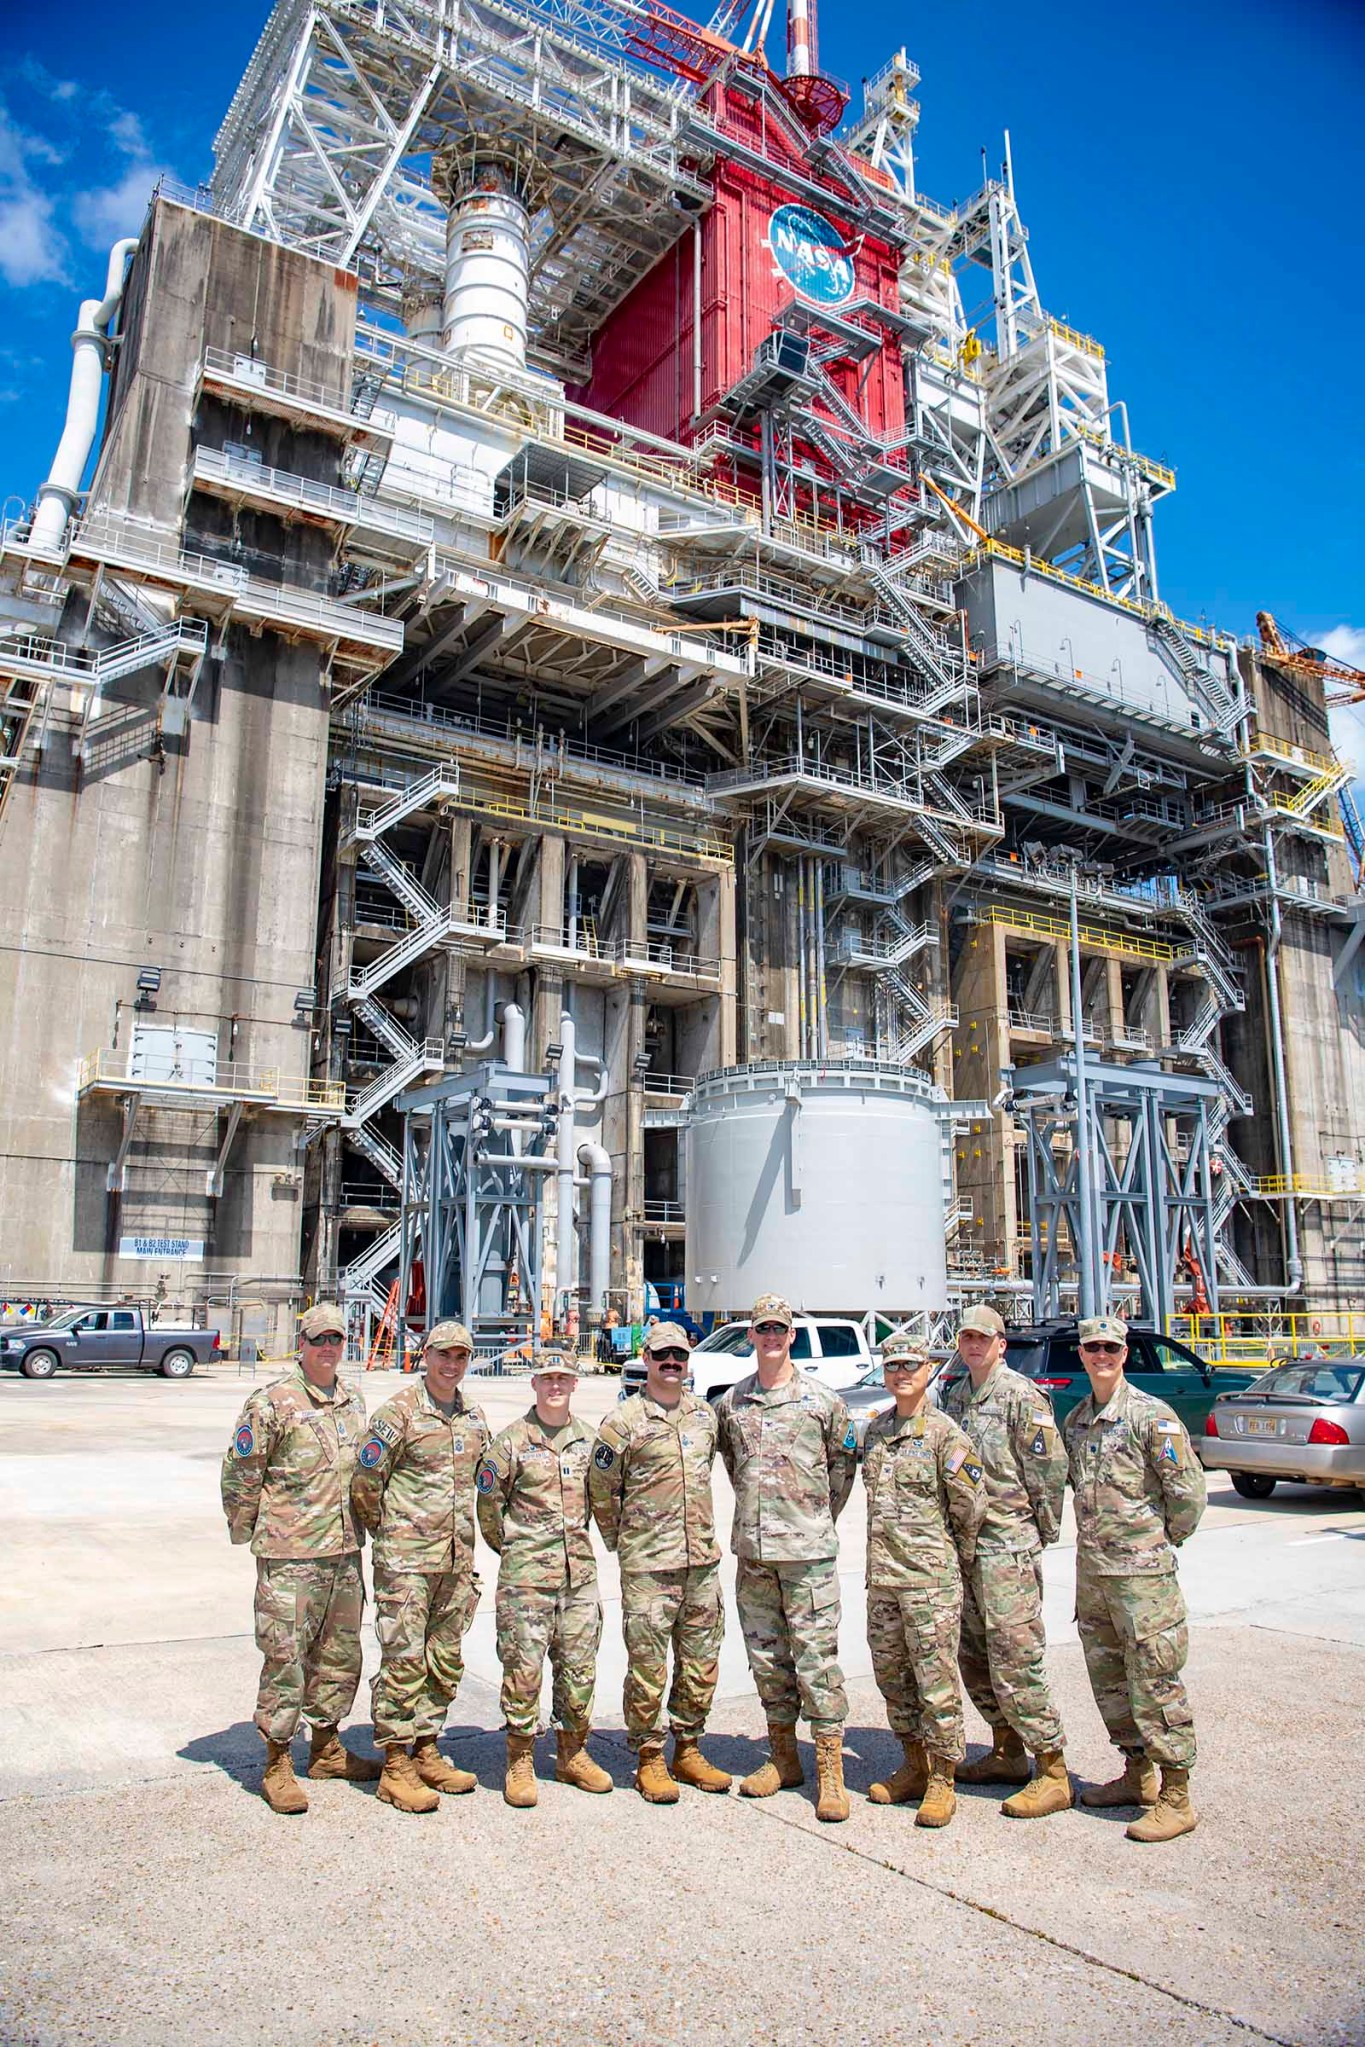 The United States Space Force Training Leadership Team stops for a photo in front of test stand at NASA Stennis